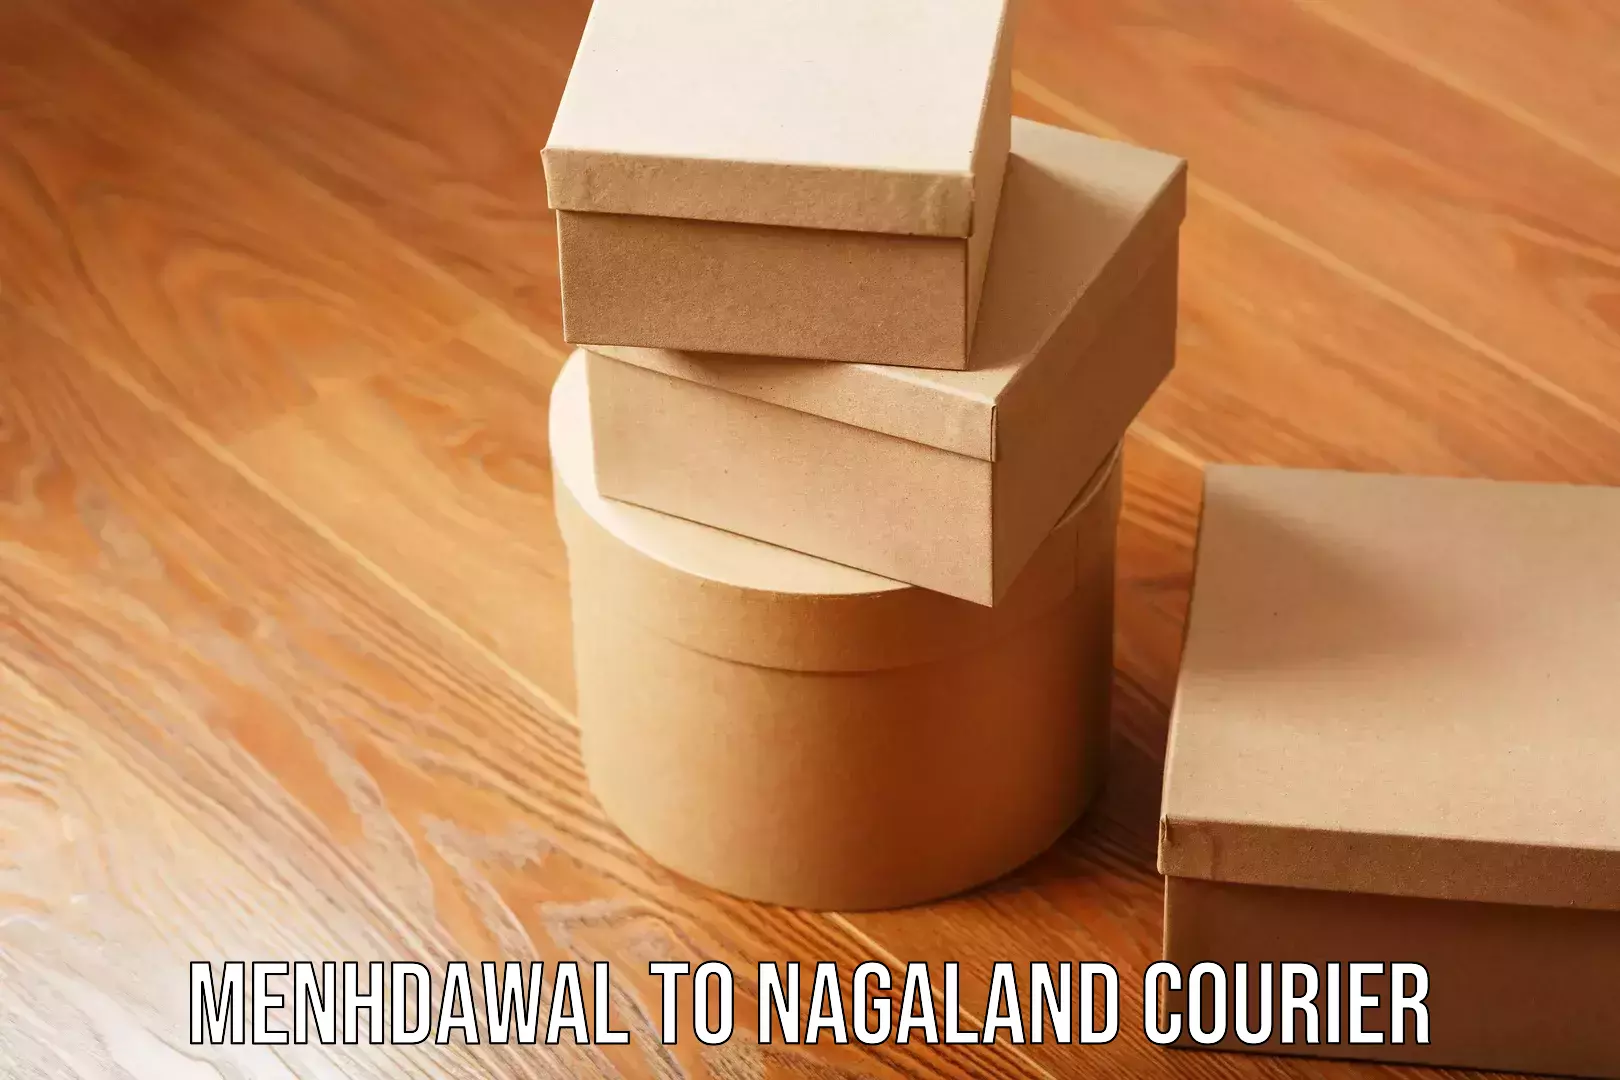 Efficient relocation services in Menhdawal to Nagaland